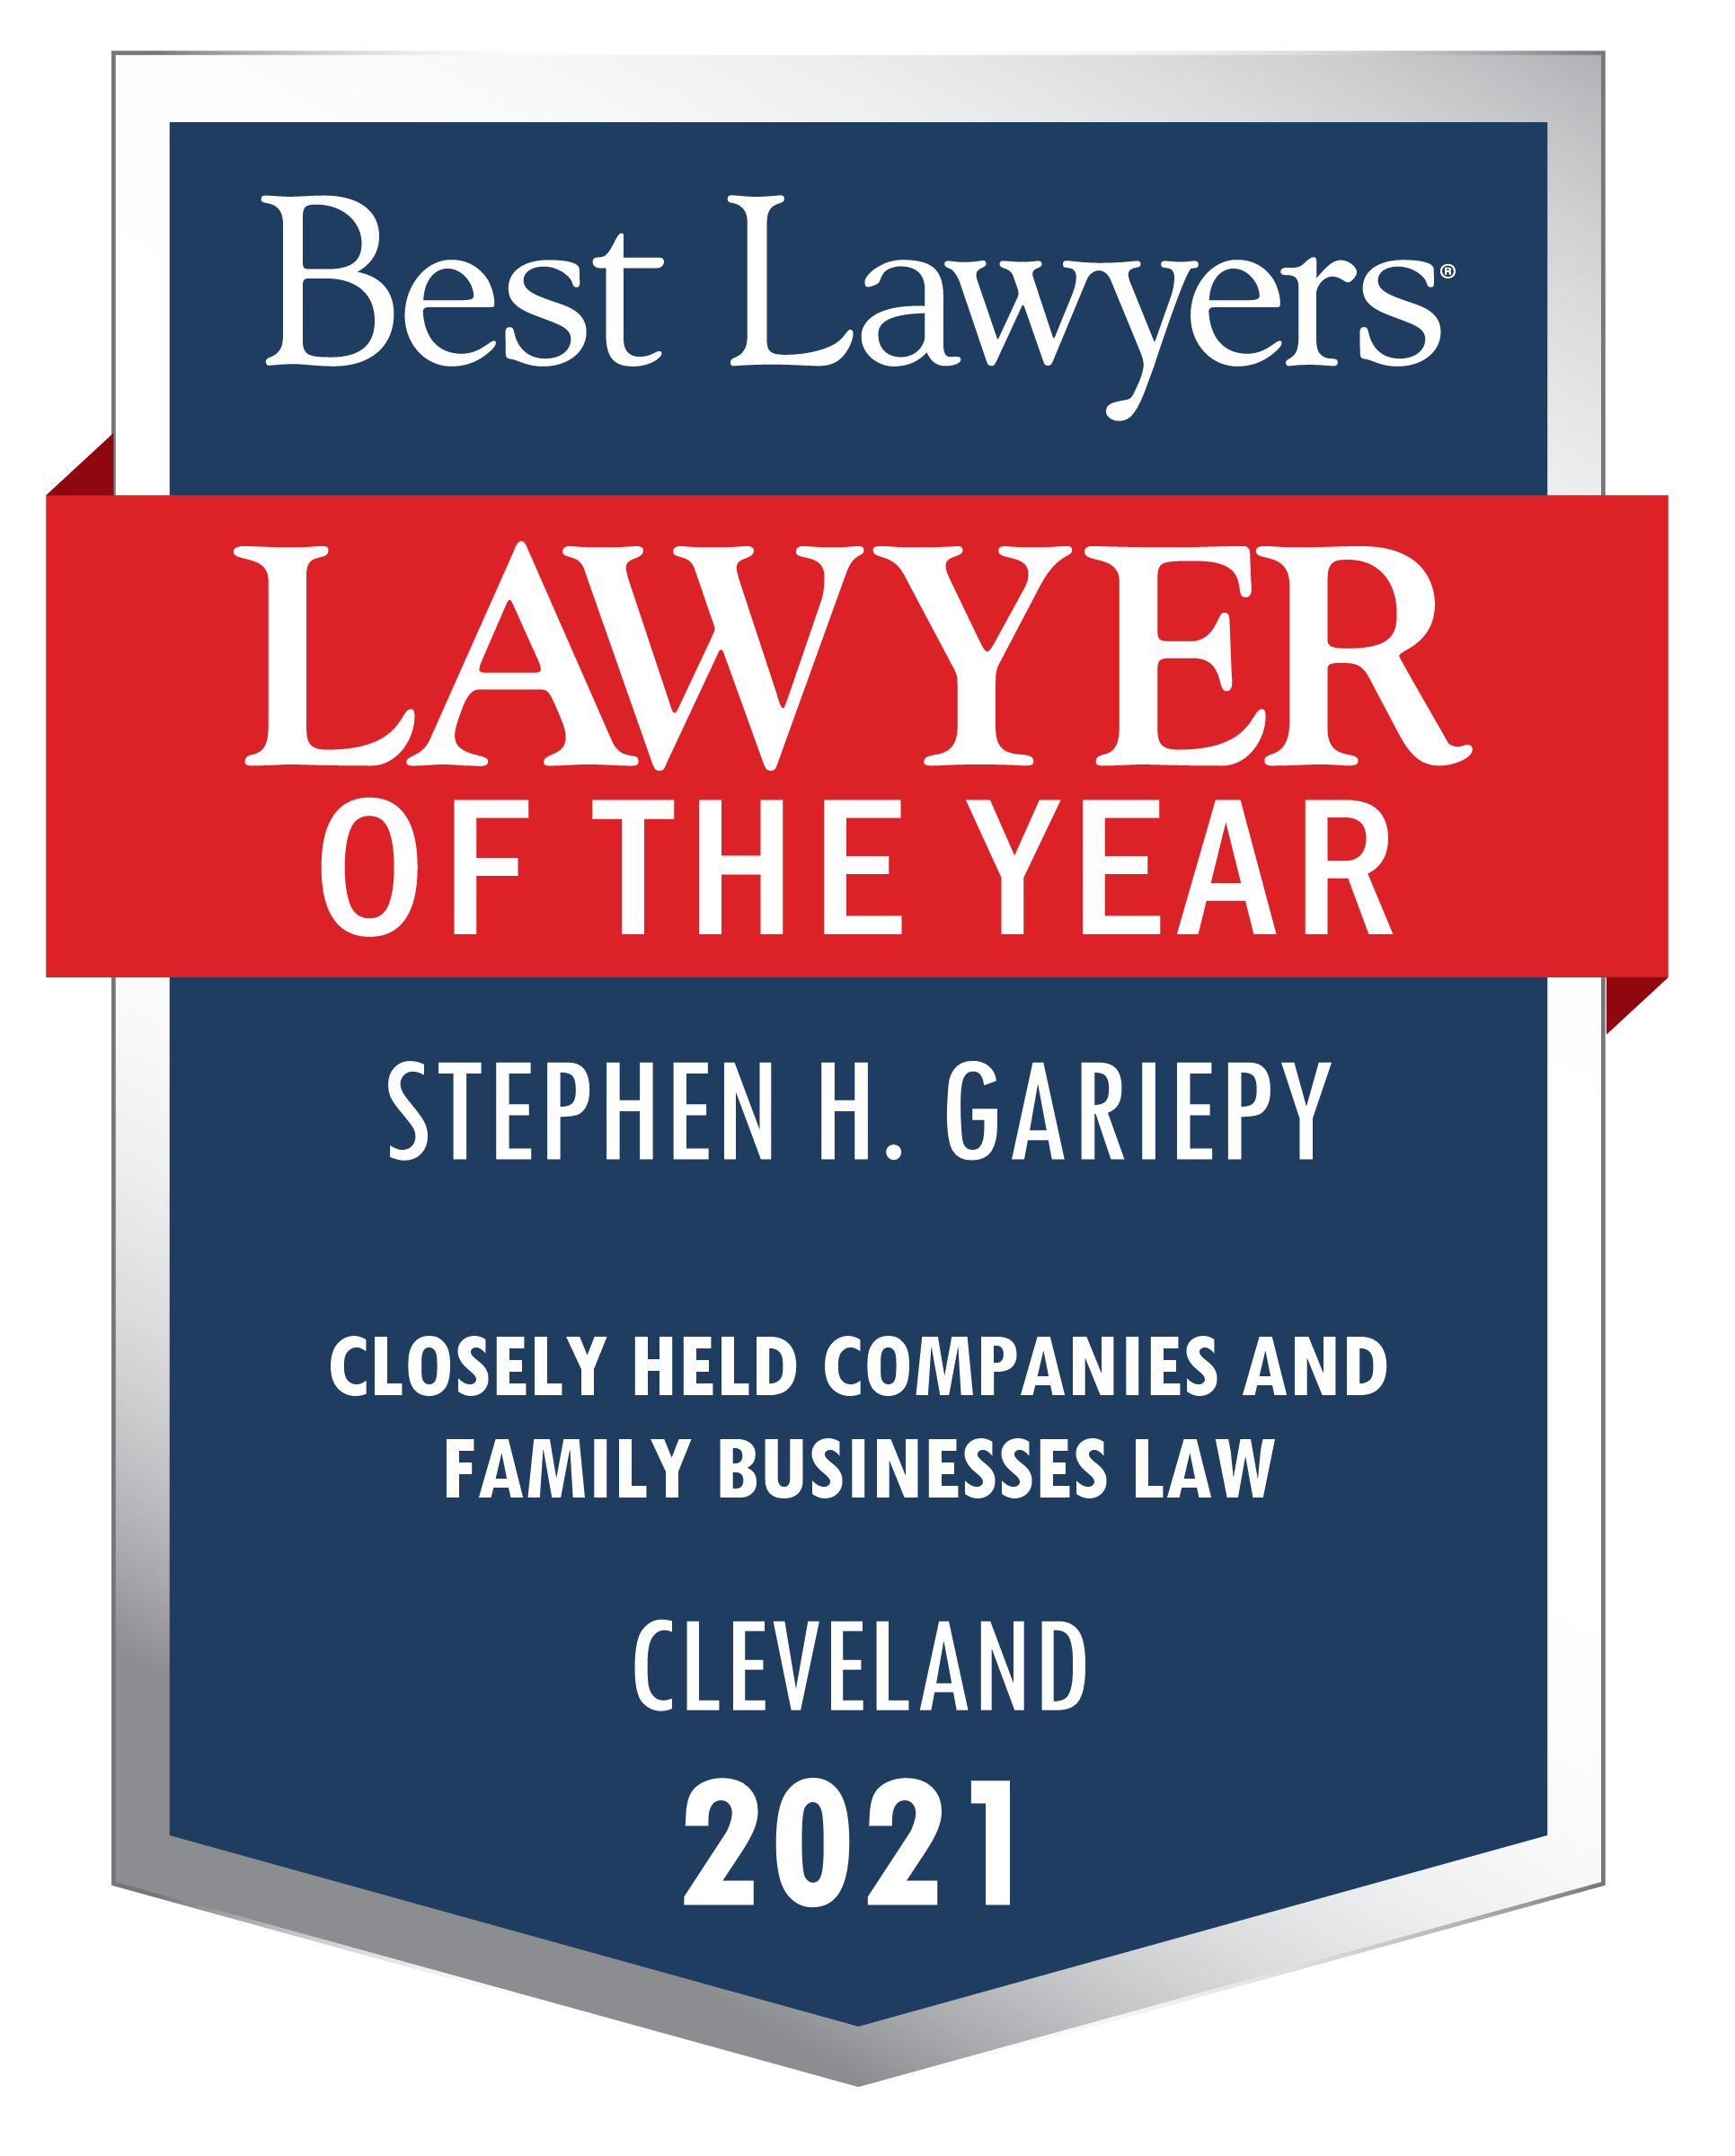 Best Lawyers Lawyer of the year Stephen Gariepy